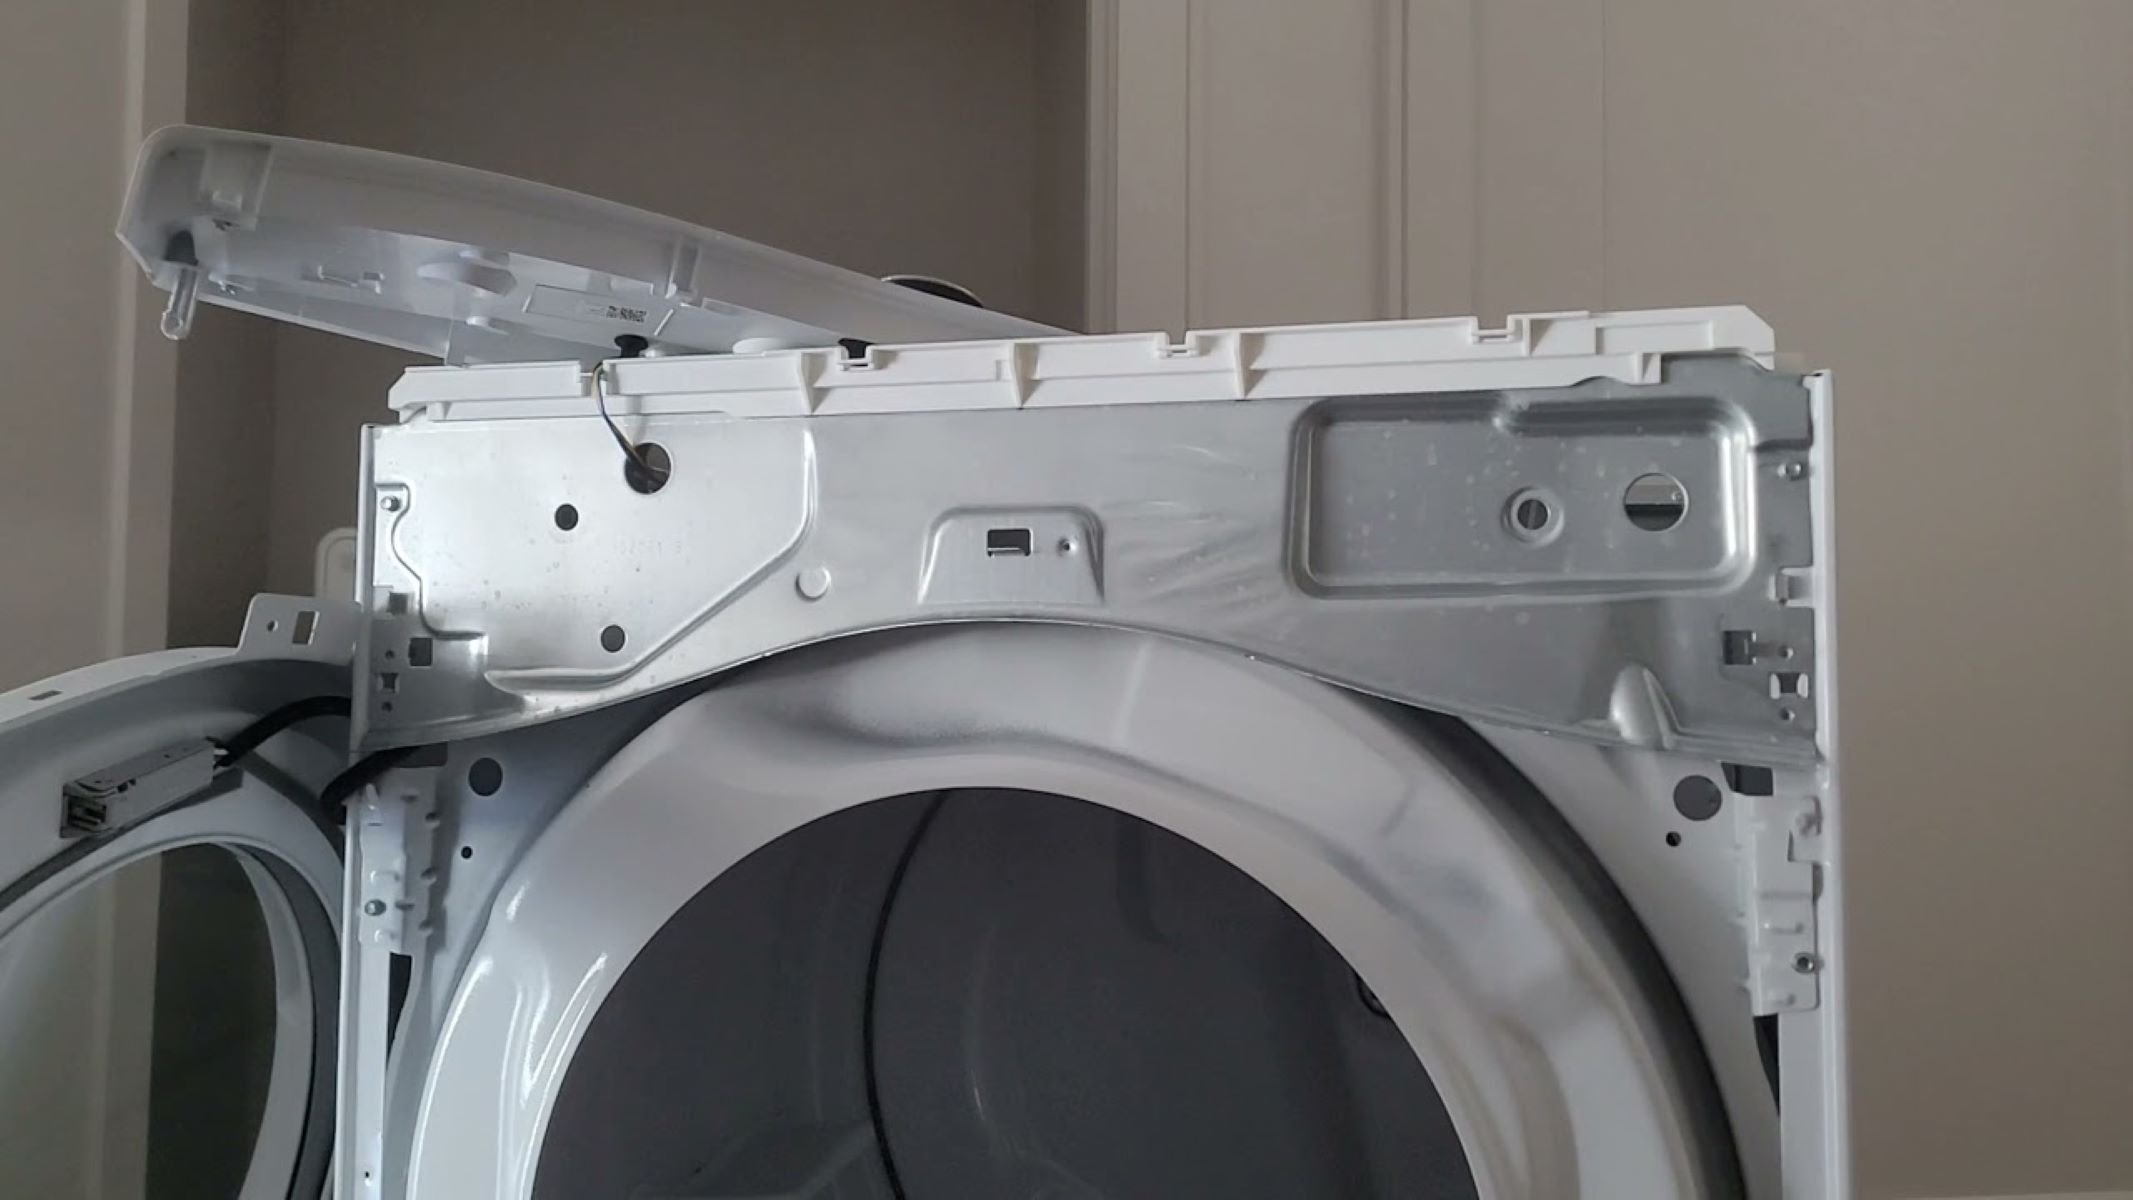 How To Fix The Error Code PF For Whirlpool Dryer